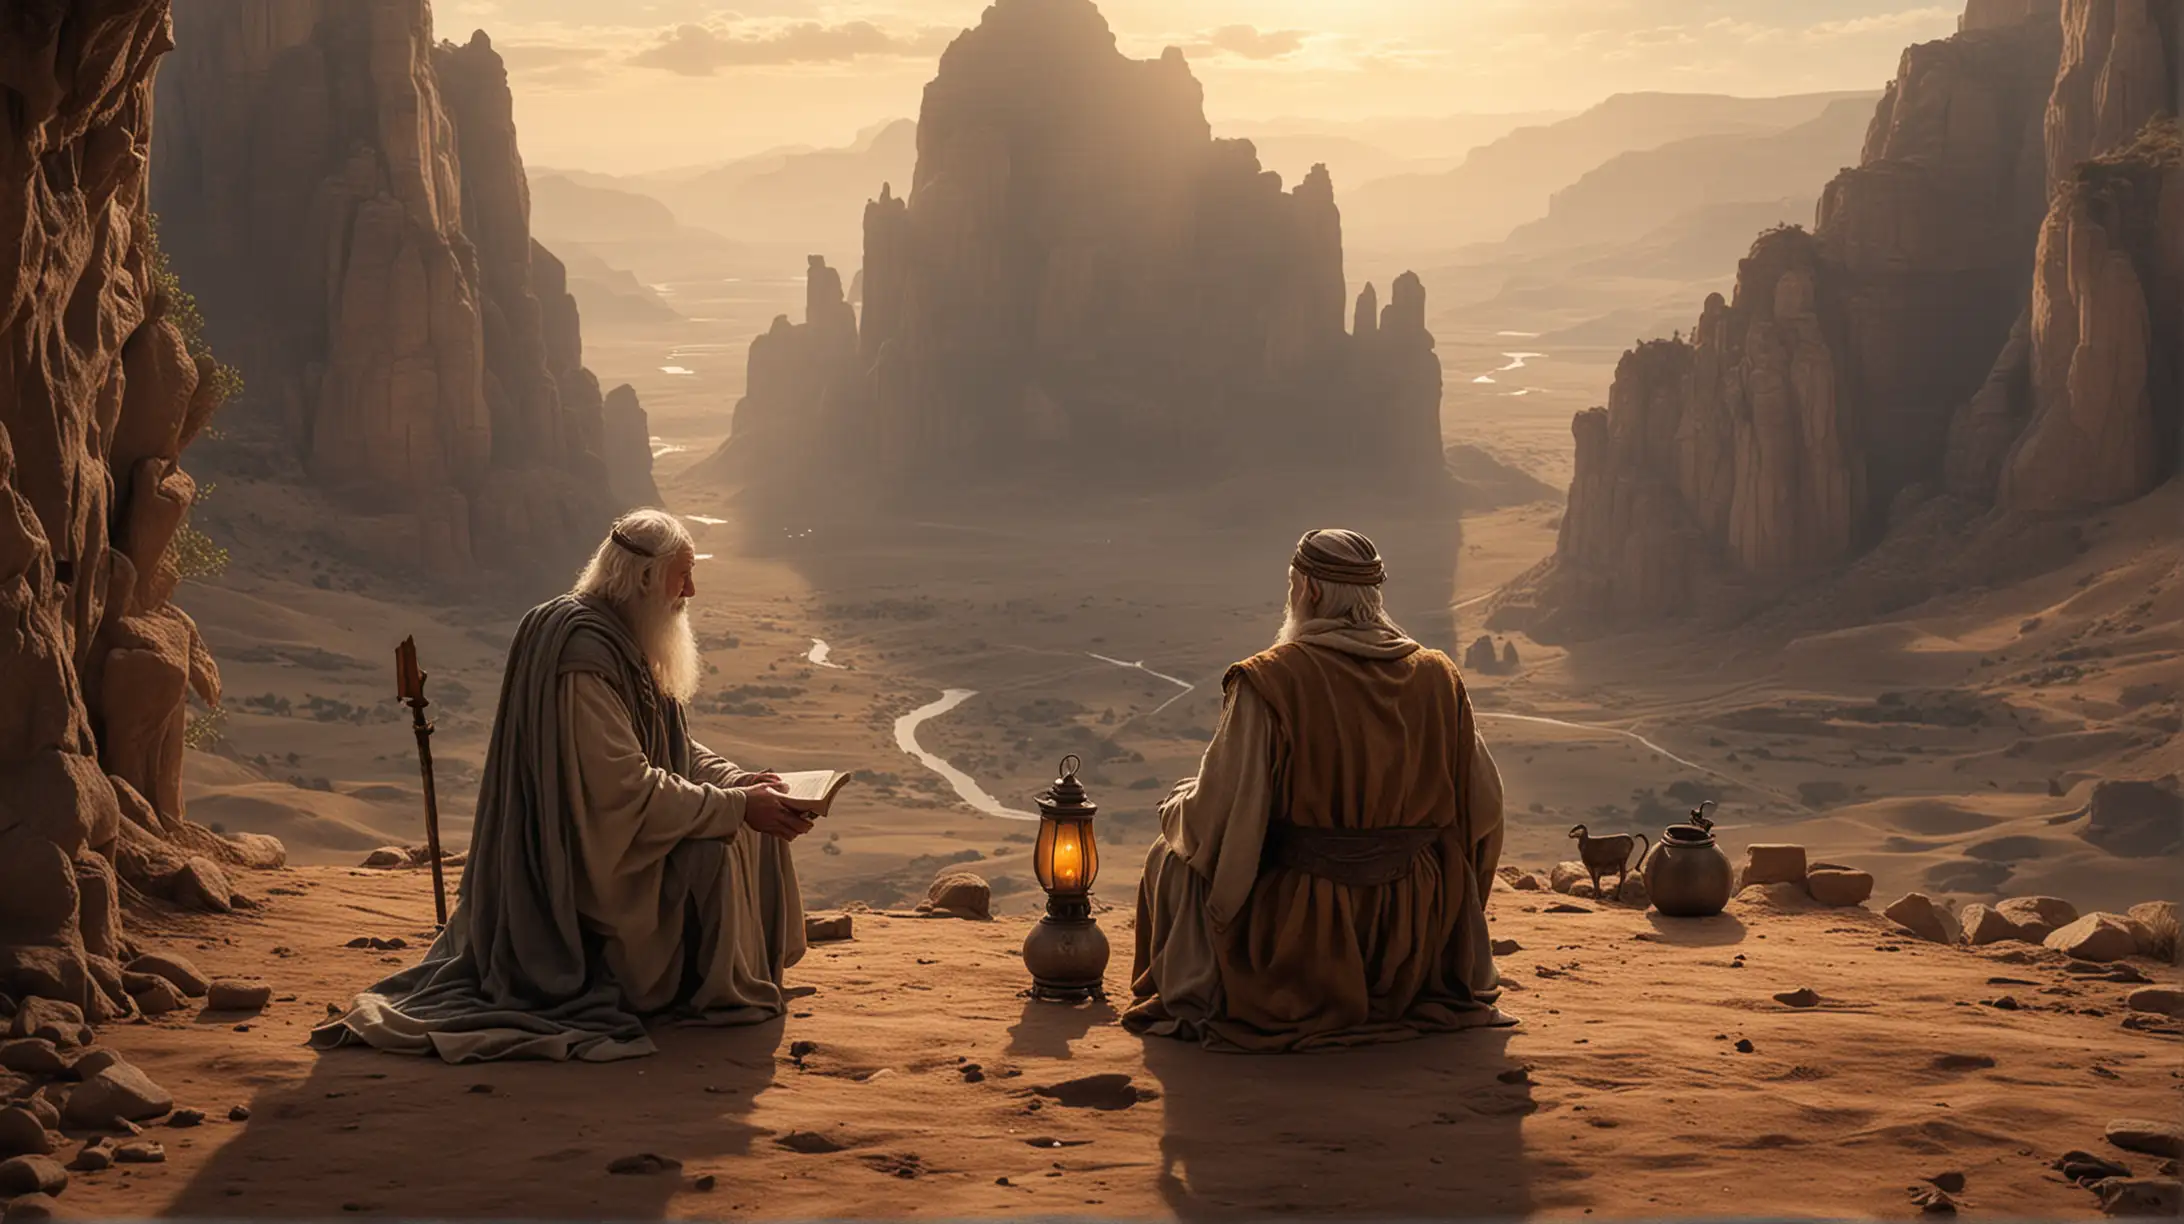 The wise man invited the traveler to sit down